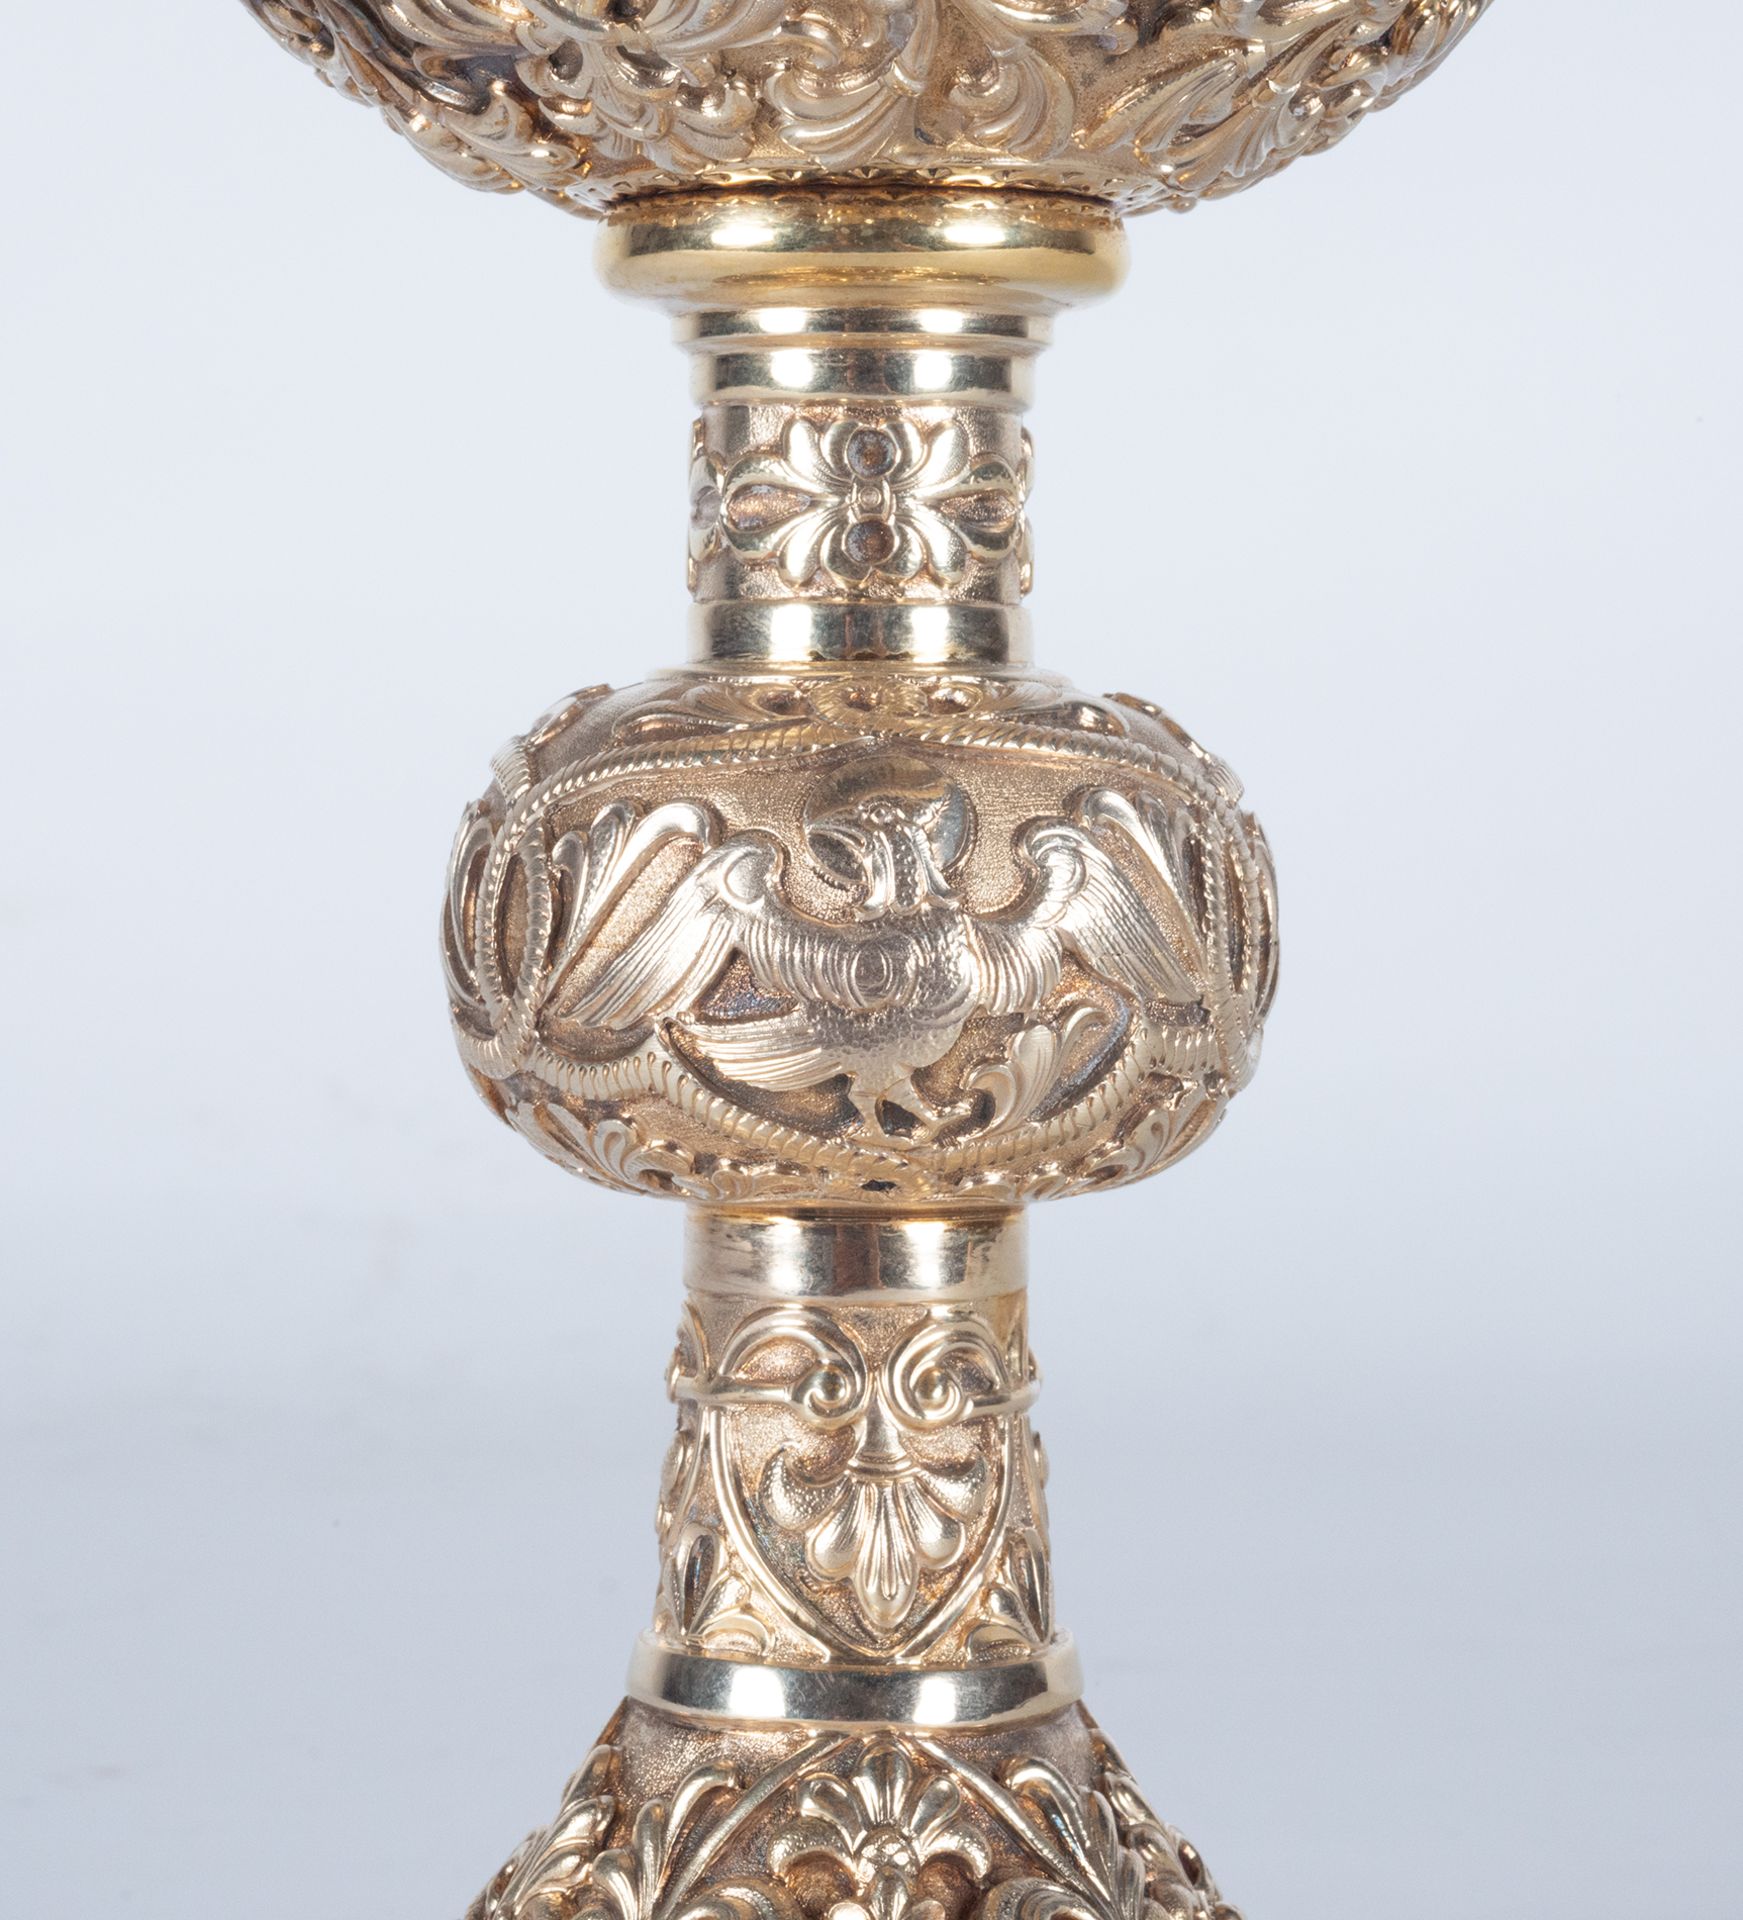 Important Liturgical Chalice in Golden 925 Sterling Silver with Salvilla, marks of Córdoba, peimra h - Image 4 of 6